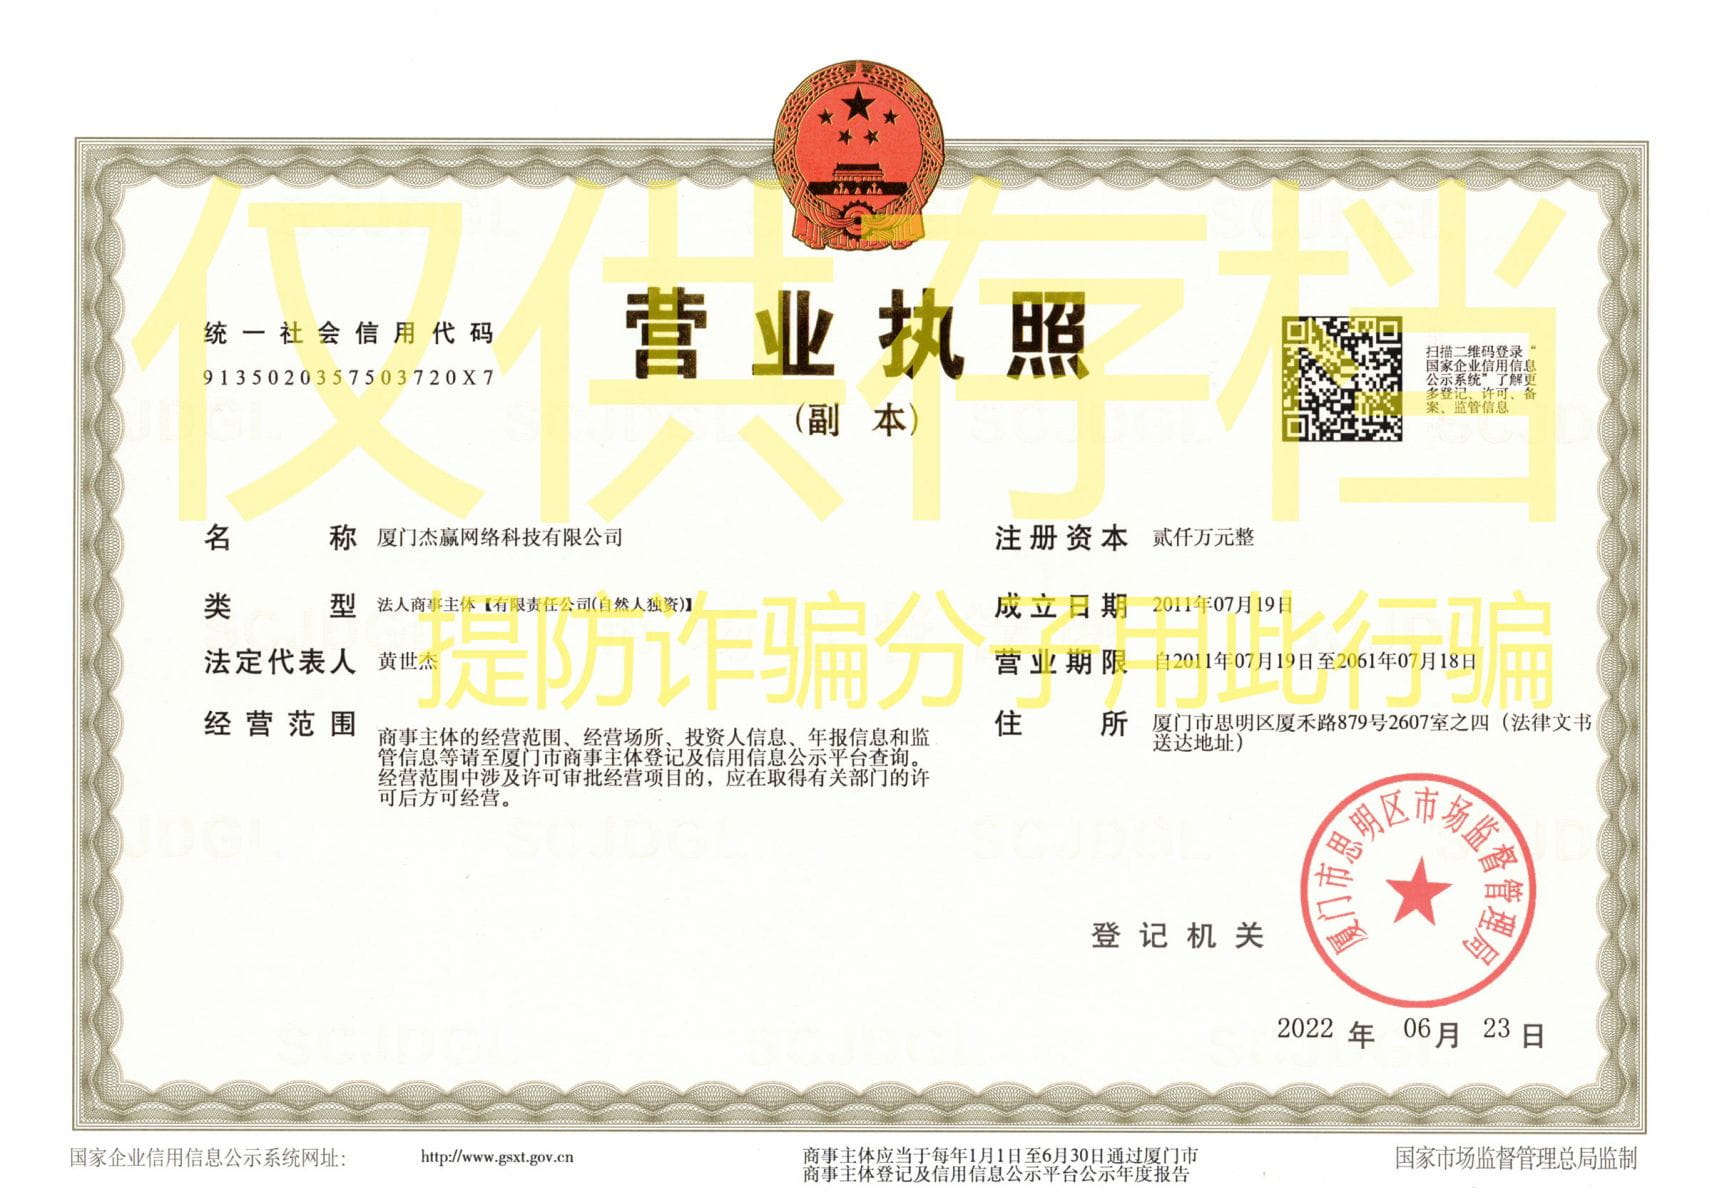 The business license of Jieying Network has been renewed